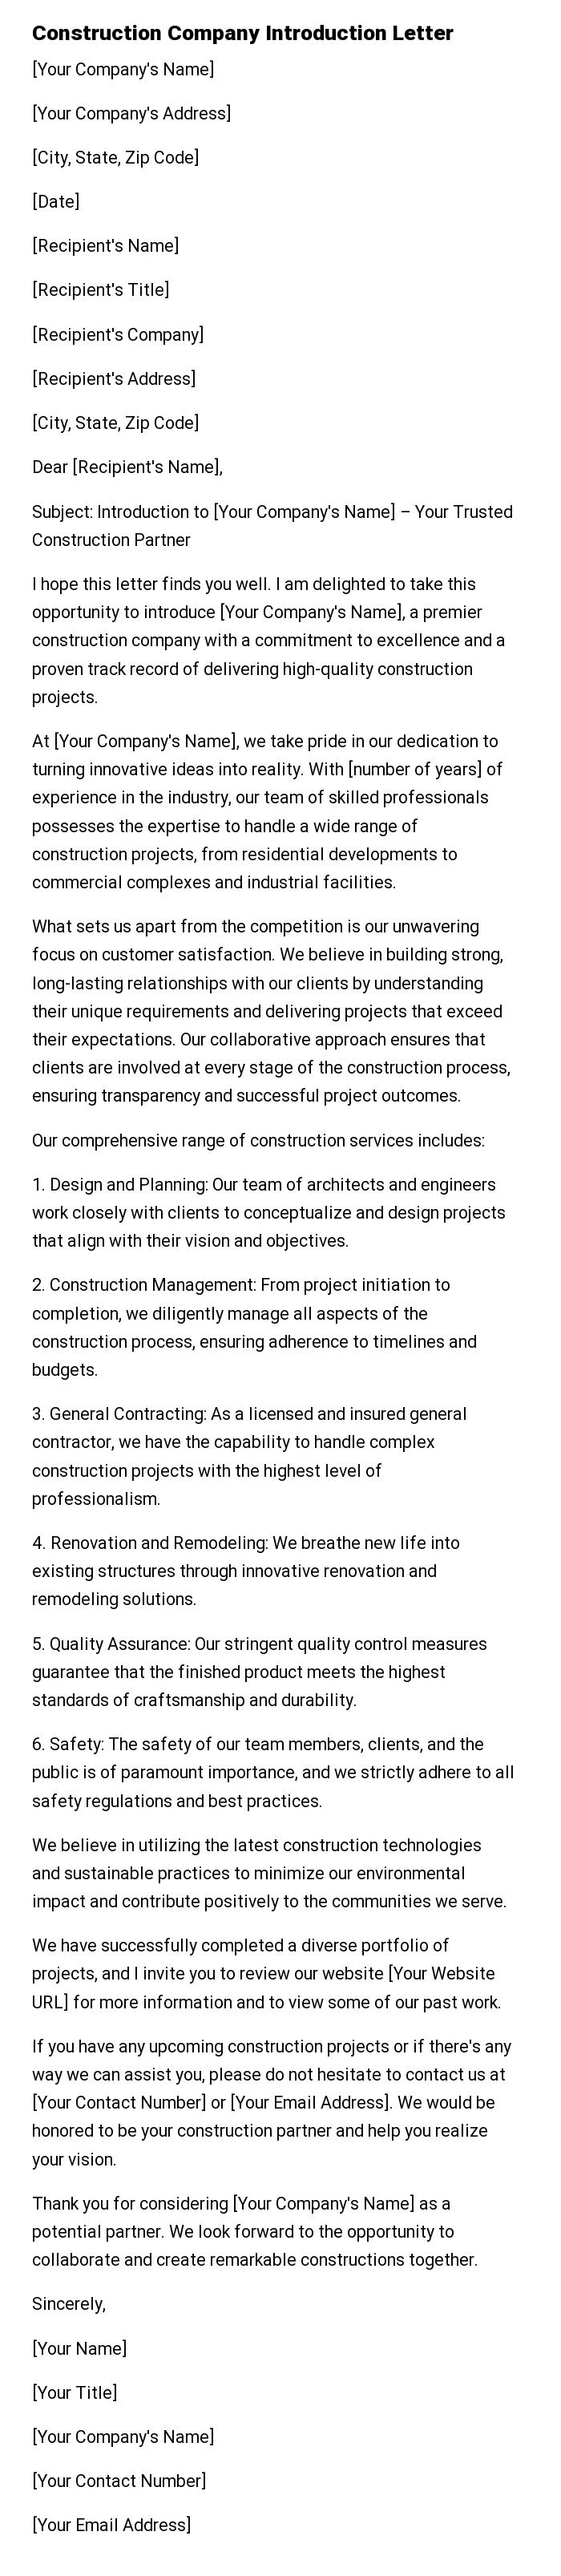 Construction Company Introduction Letter